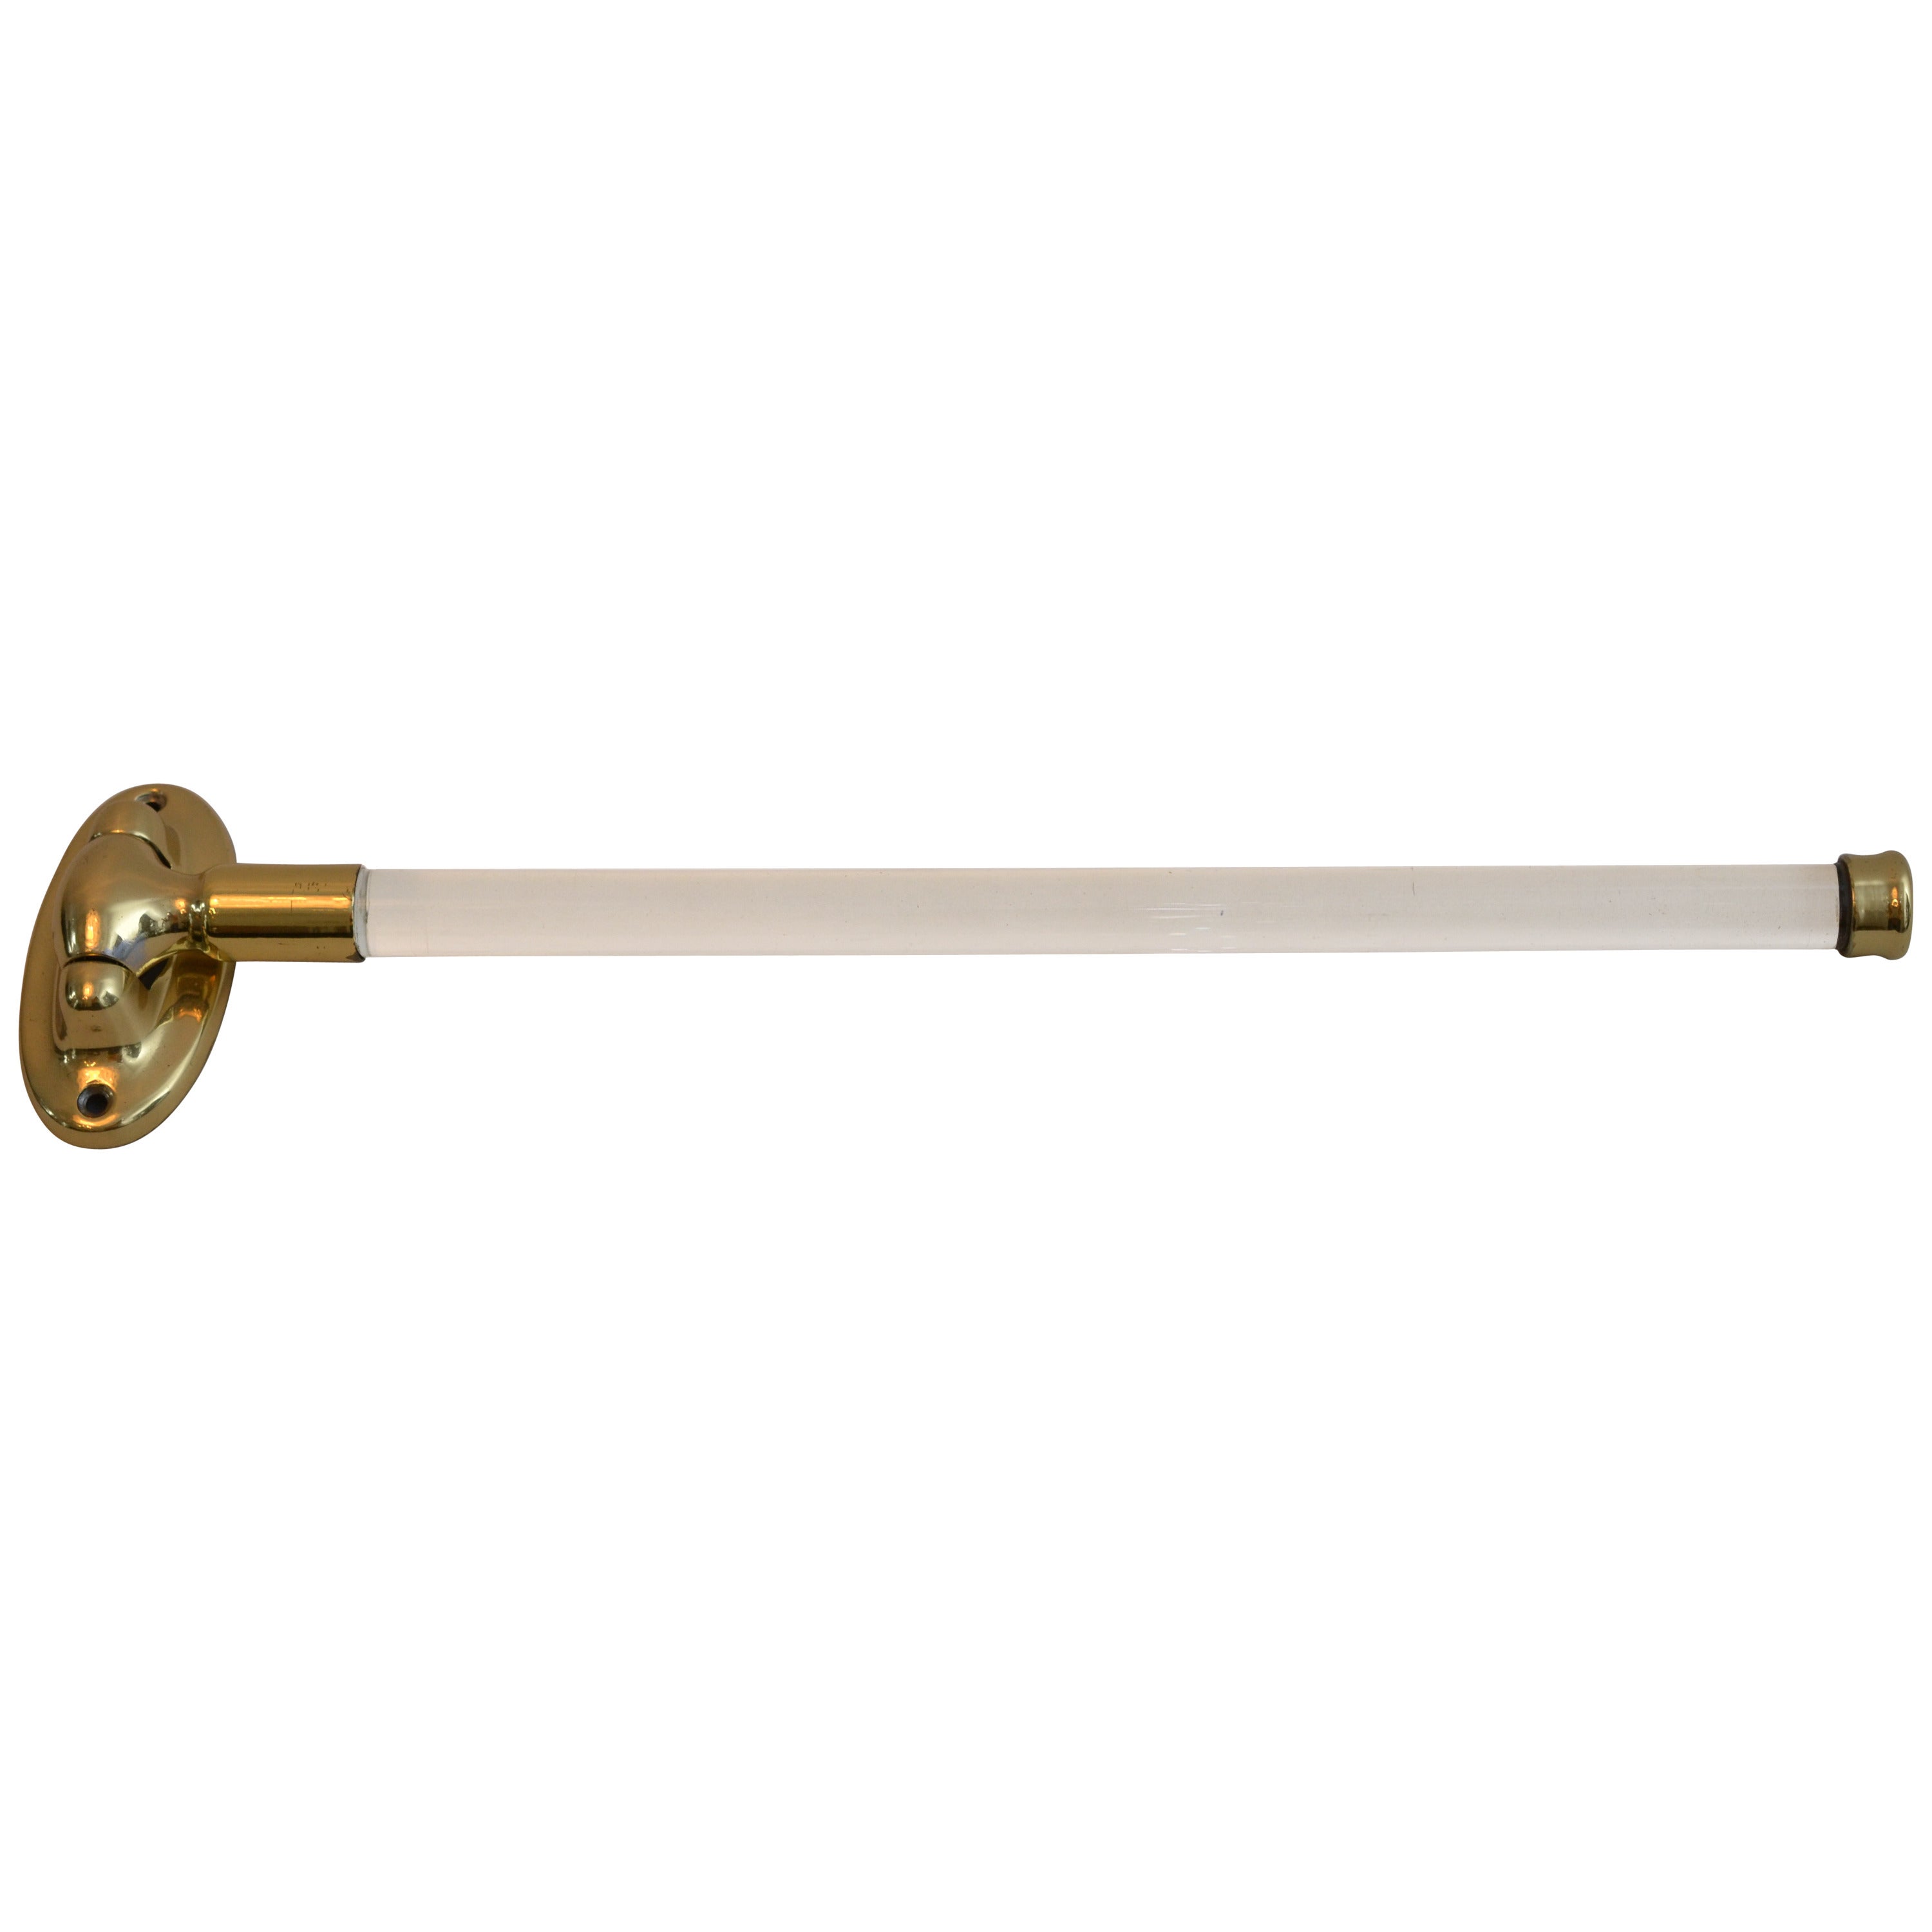 Laterally Swiveling Towel Holder from Brass and Glass